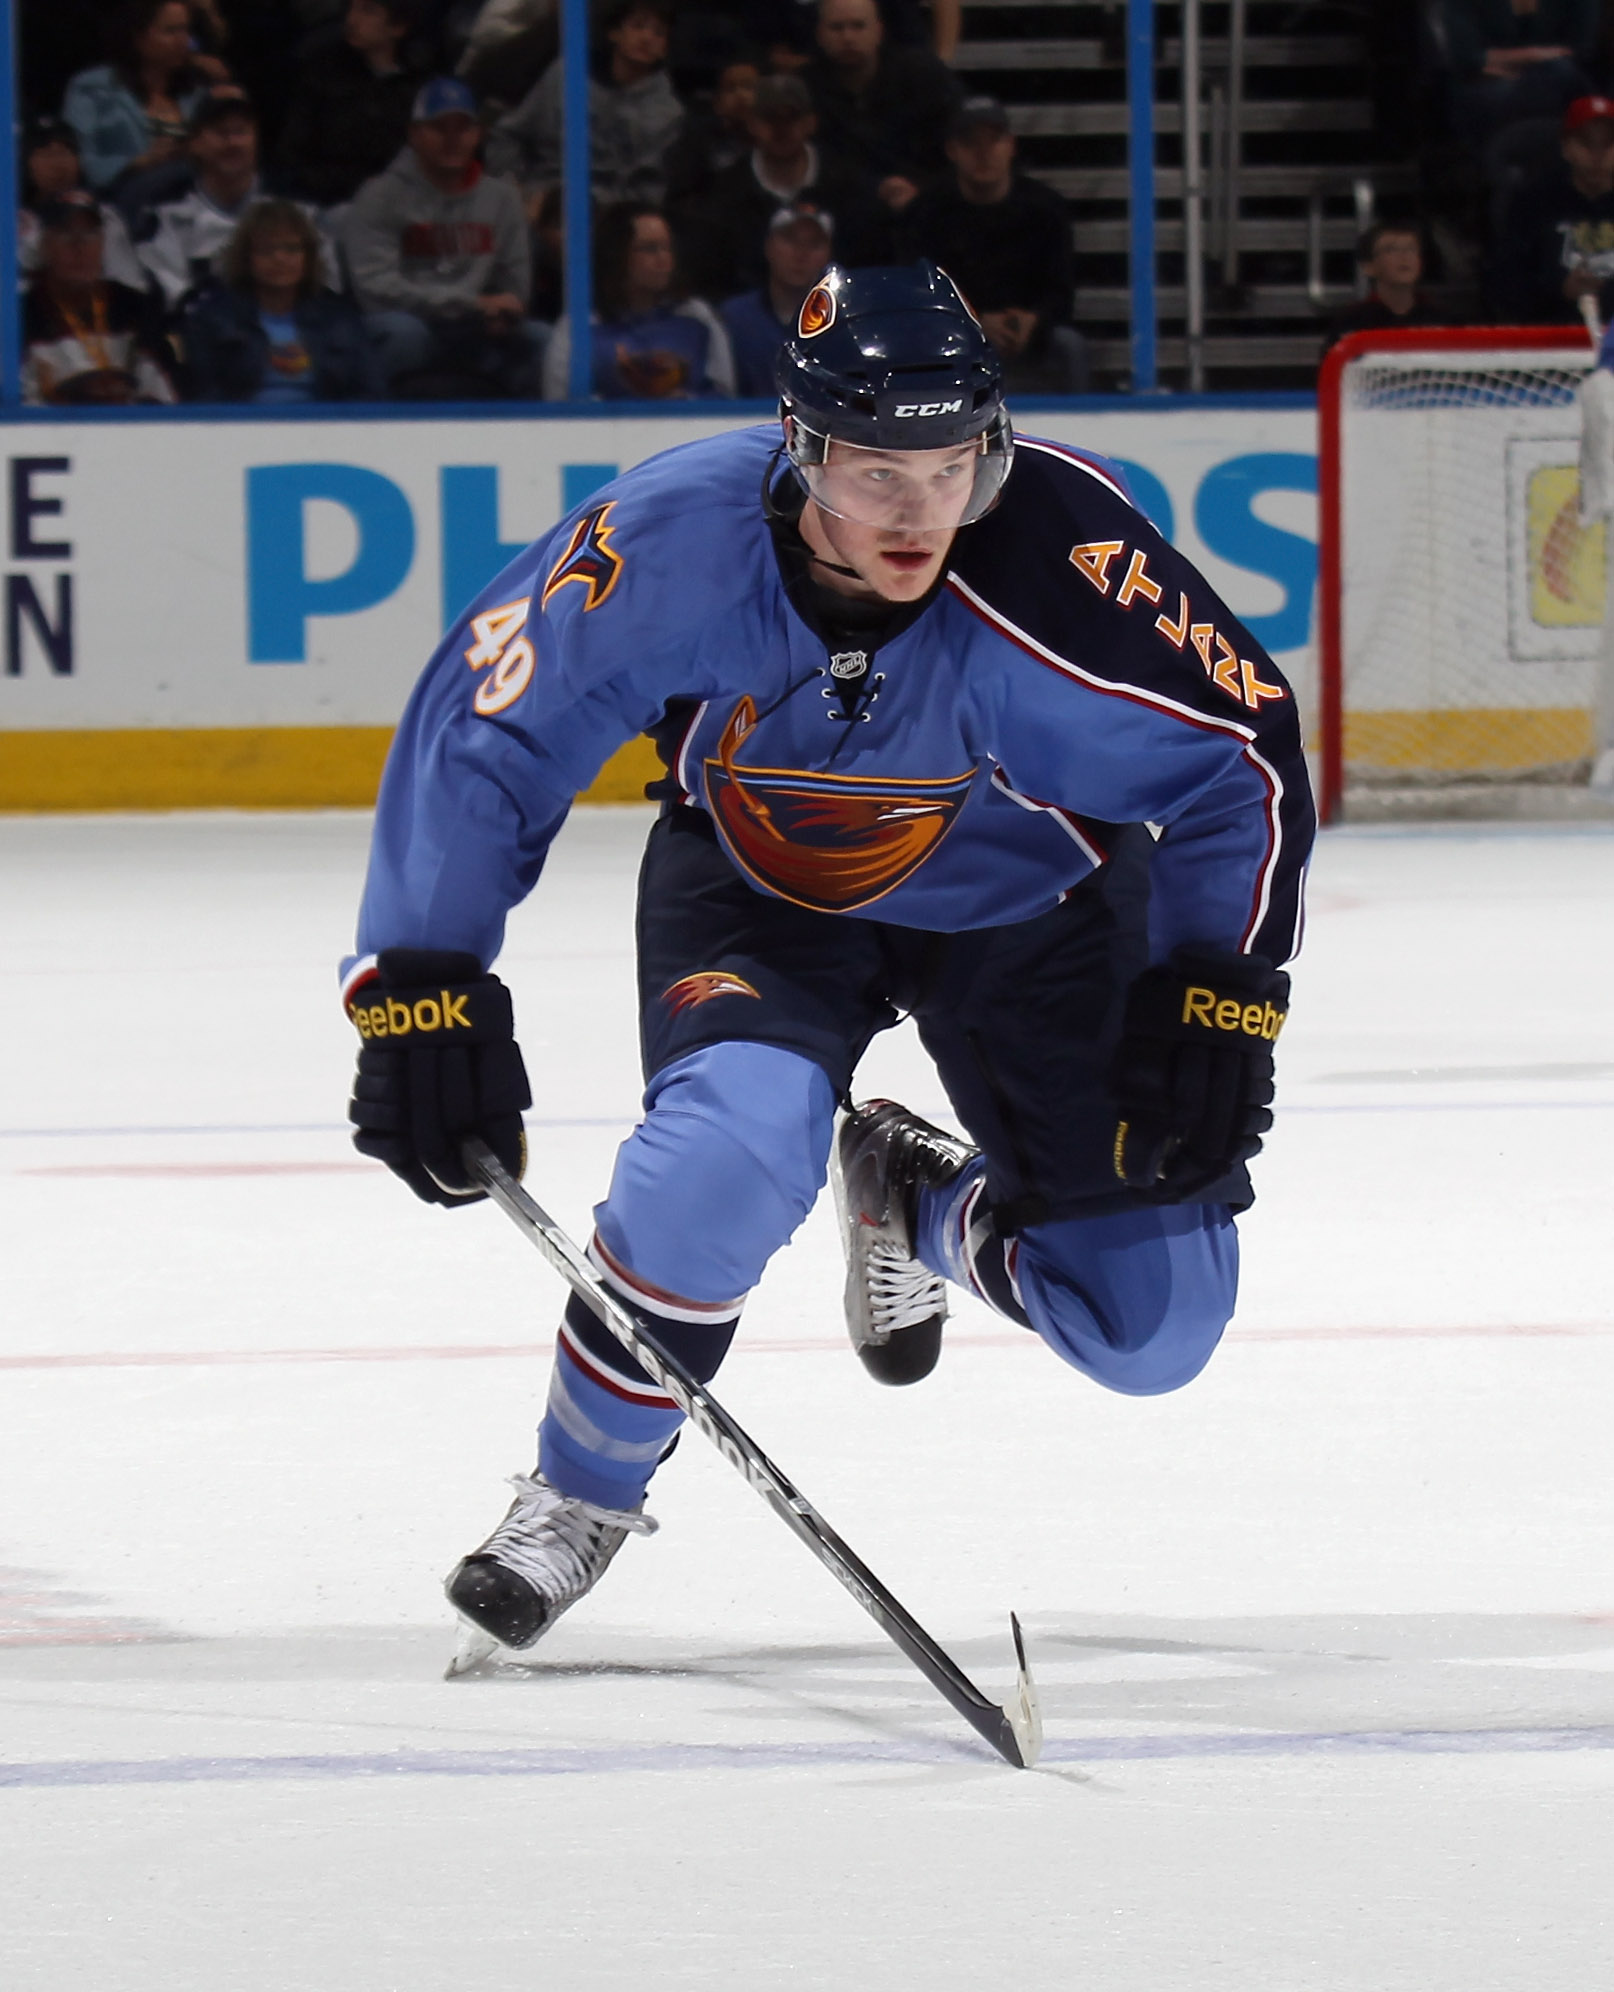 Atlanta Thrashers to Winnipeg: Predictions for the Players on the